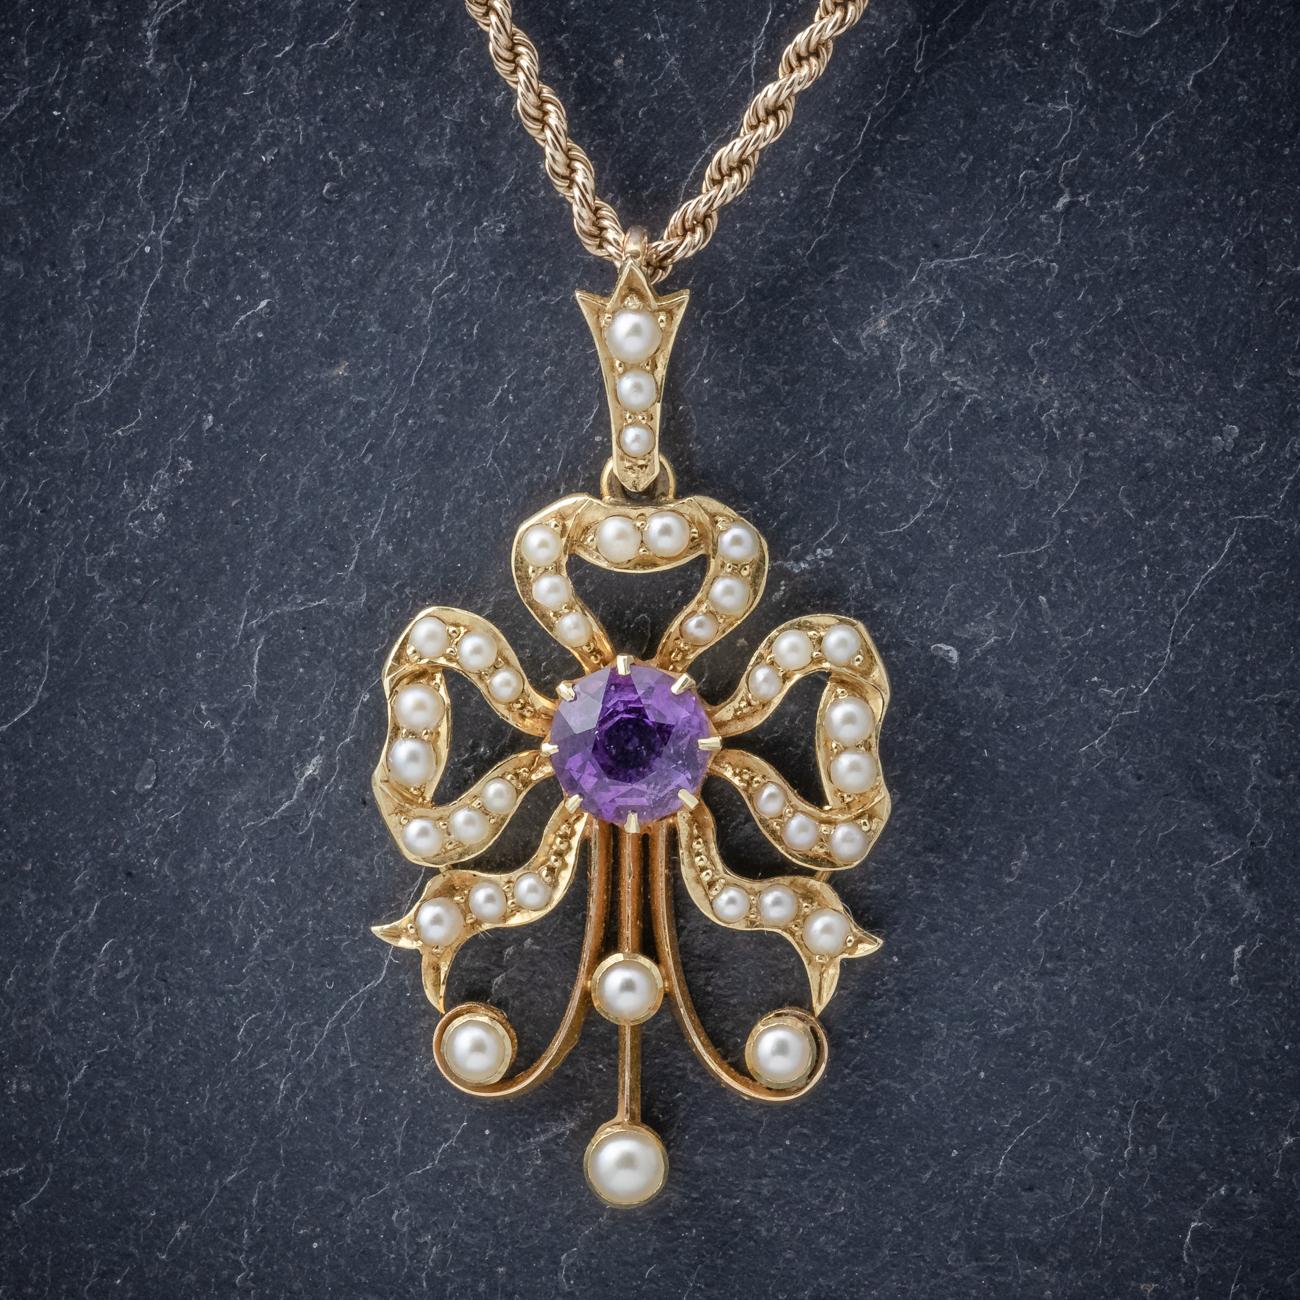 A lovely antique Edwardian necklace C. 1910 featuring a pretty pendant decorated with Pearls and a 0.70ct Amethyst. The pendant is a lovely unusual design and set in 15ct Yellow Gold. This is accompanied by a wonderful rope twist chain fitted with a